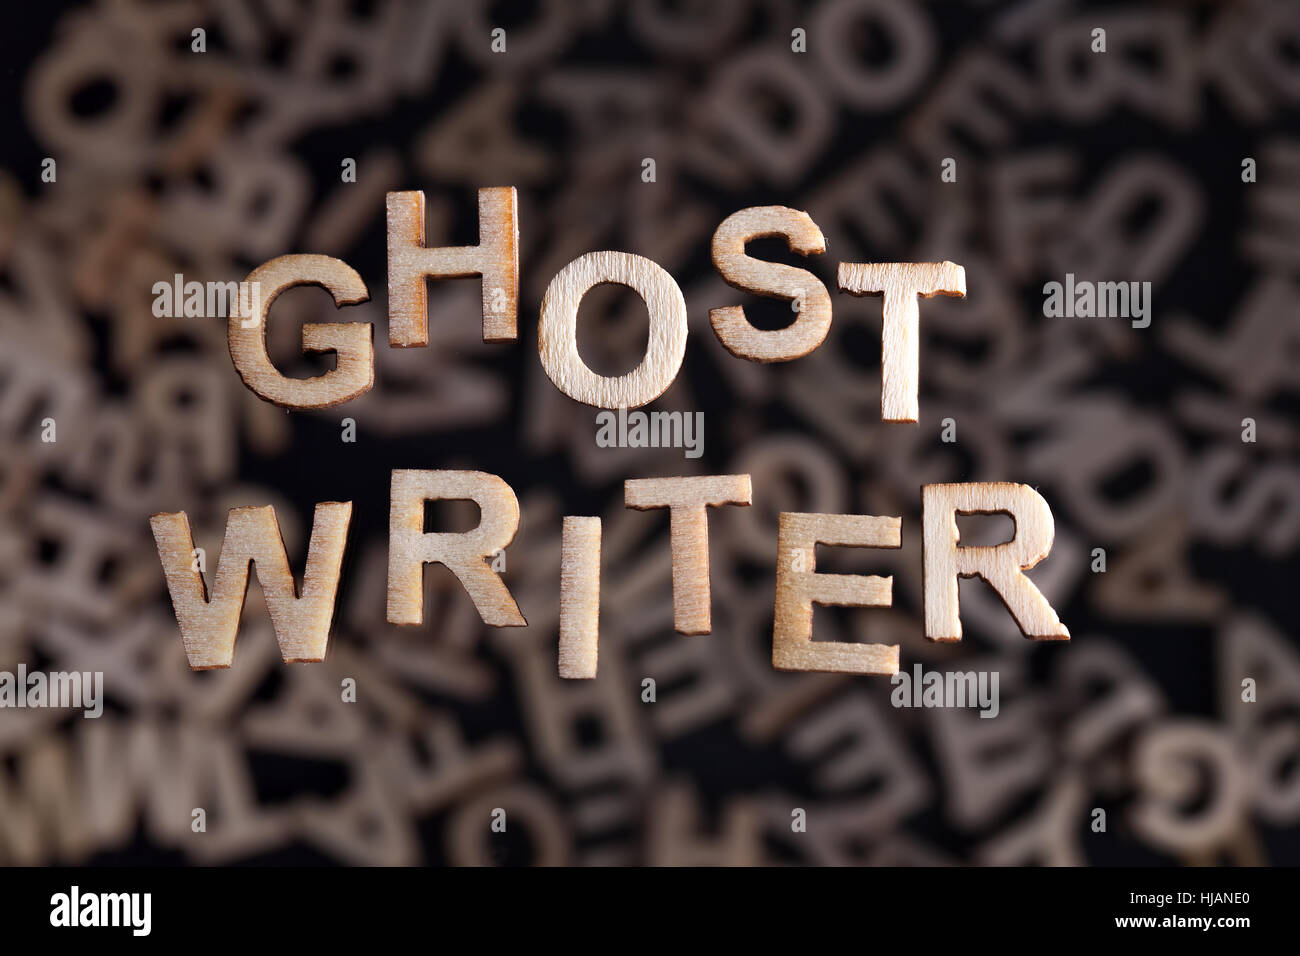 Ghostwriter text in wooden letters floating above random letters out of focus Stock Photo